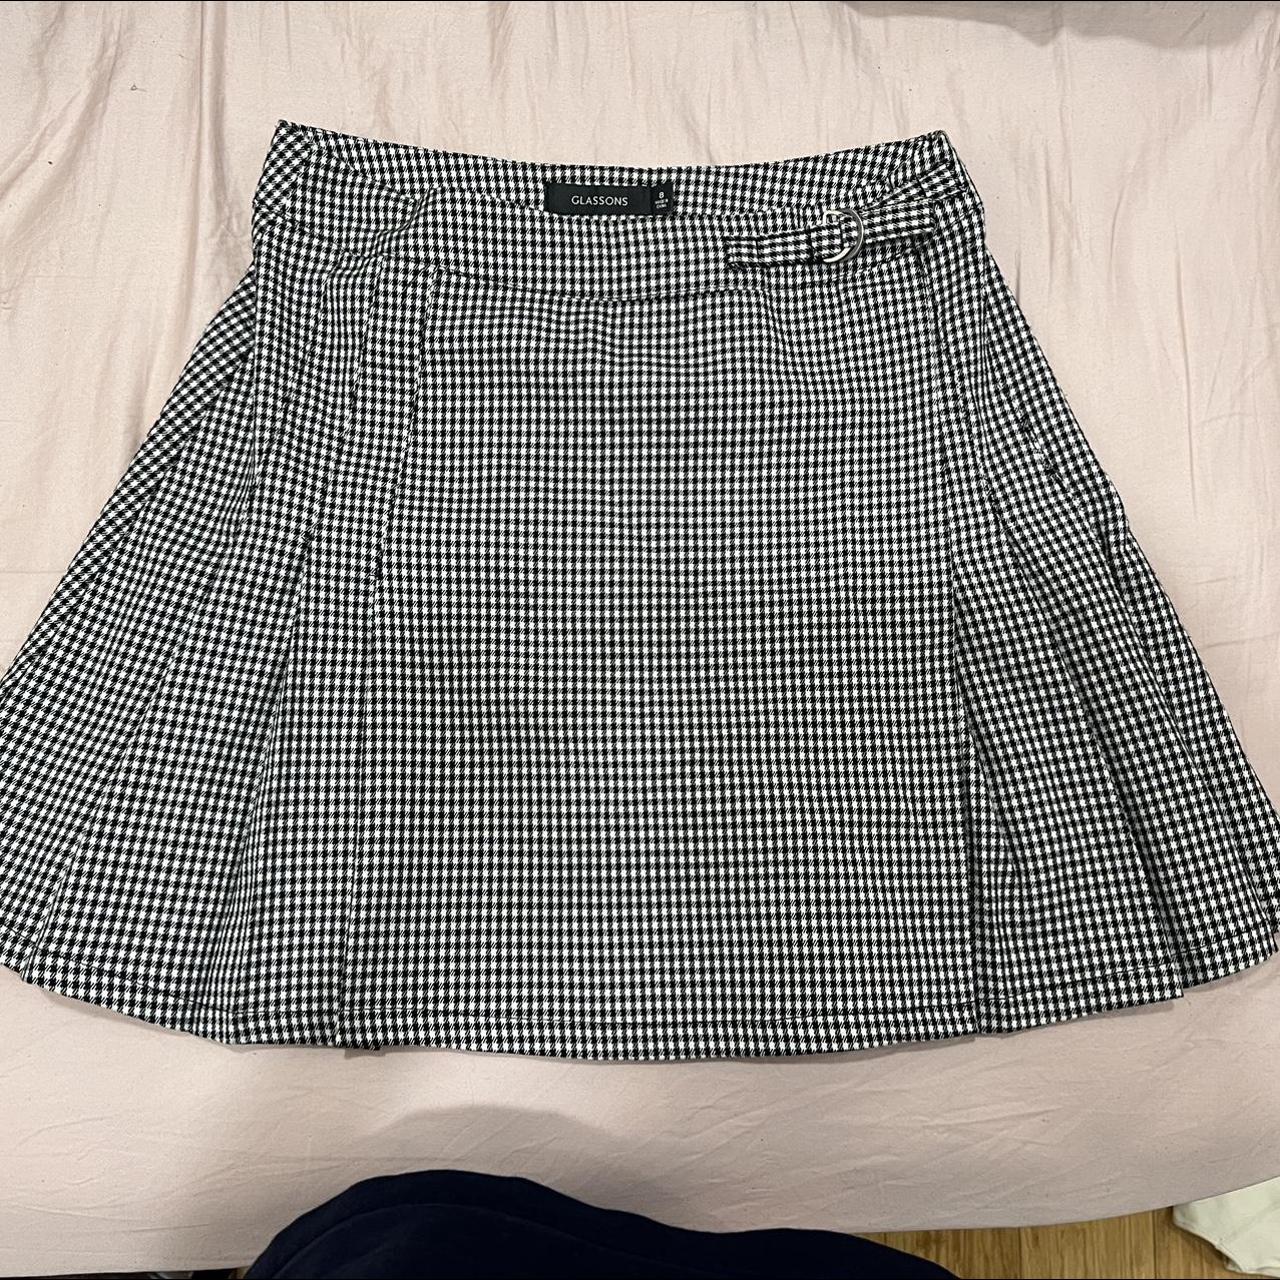 Glassons pleated skirt Size: 8 Plaid black and... - Depop